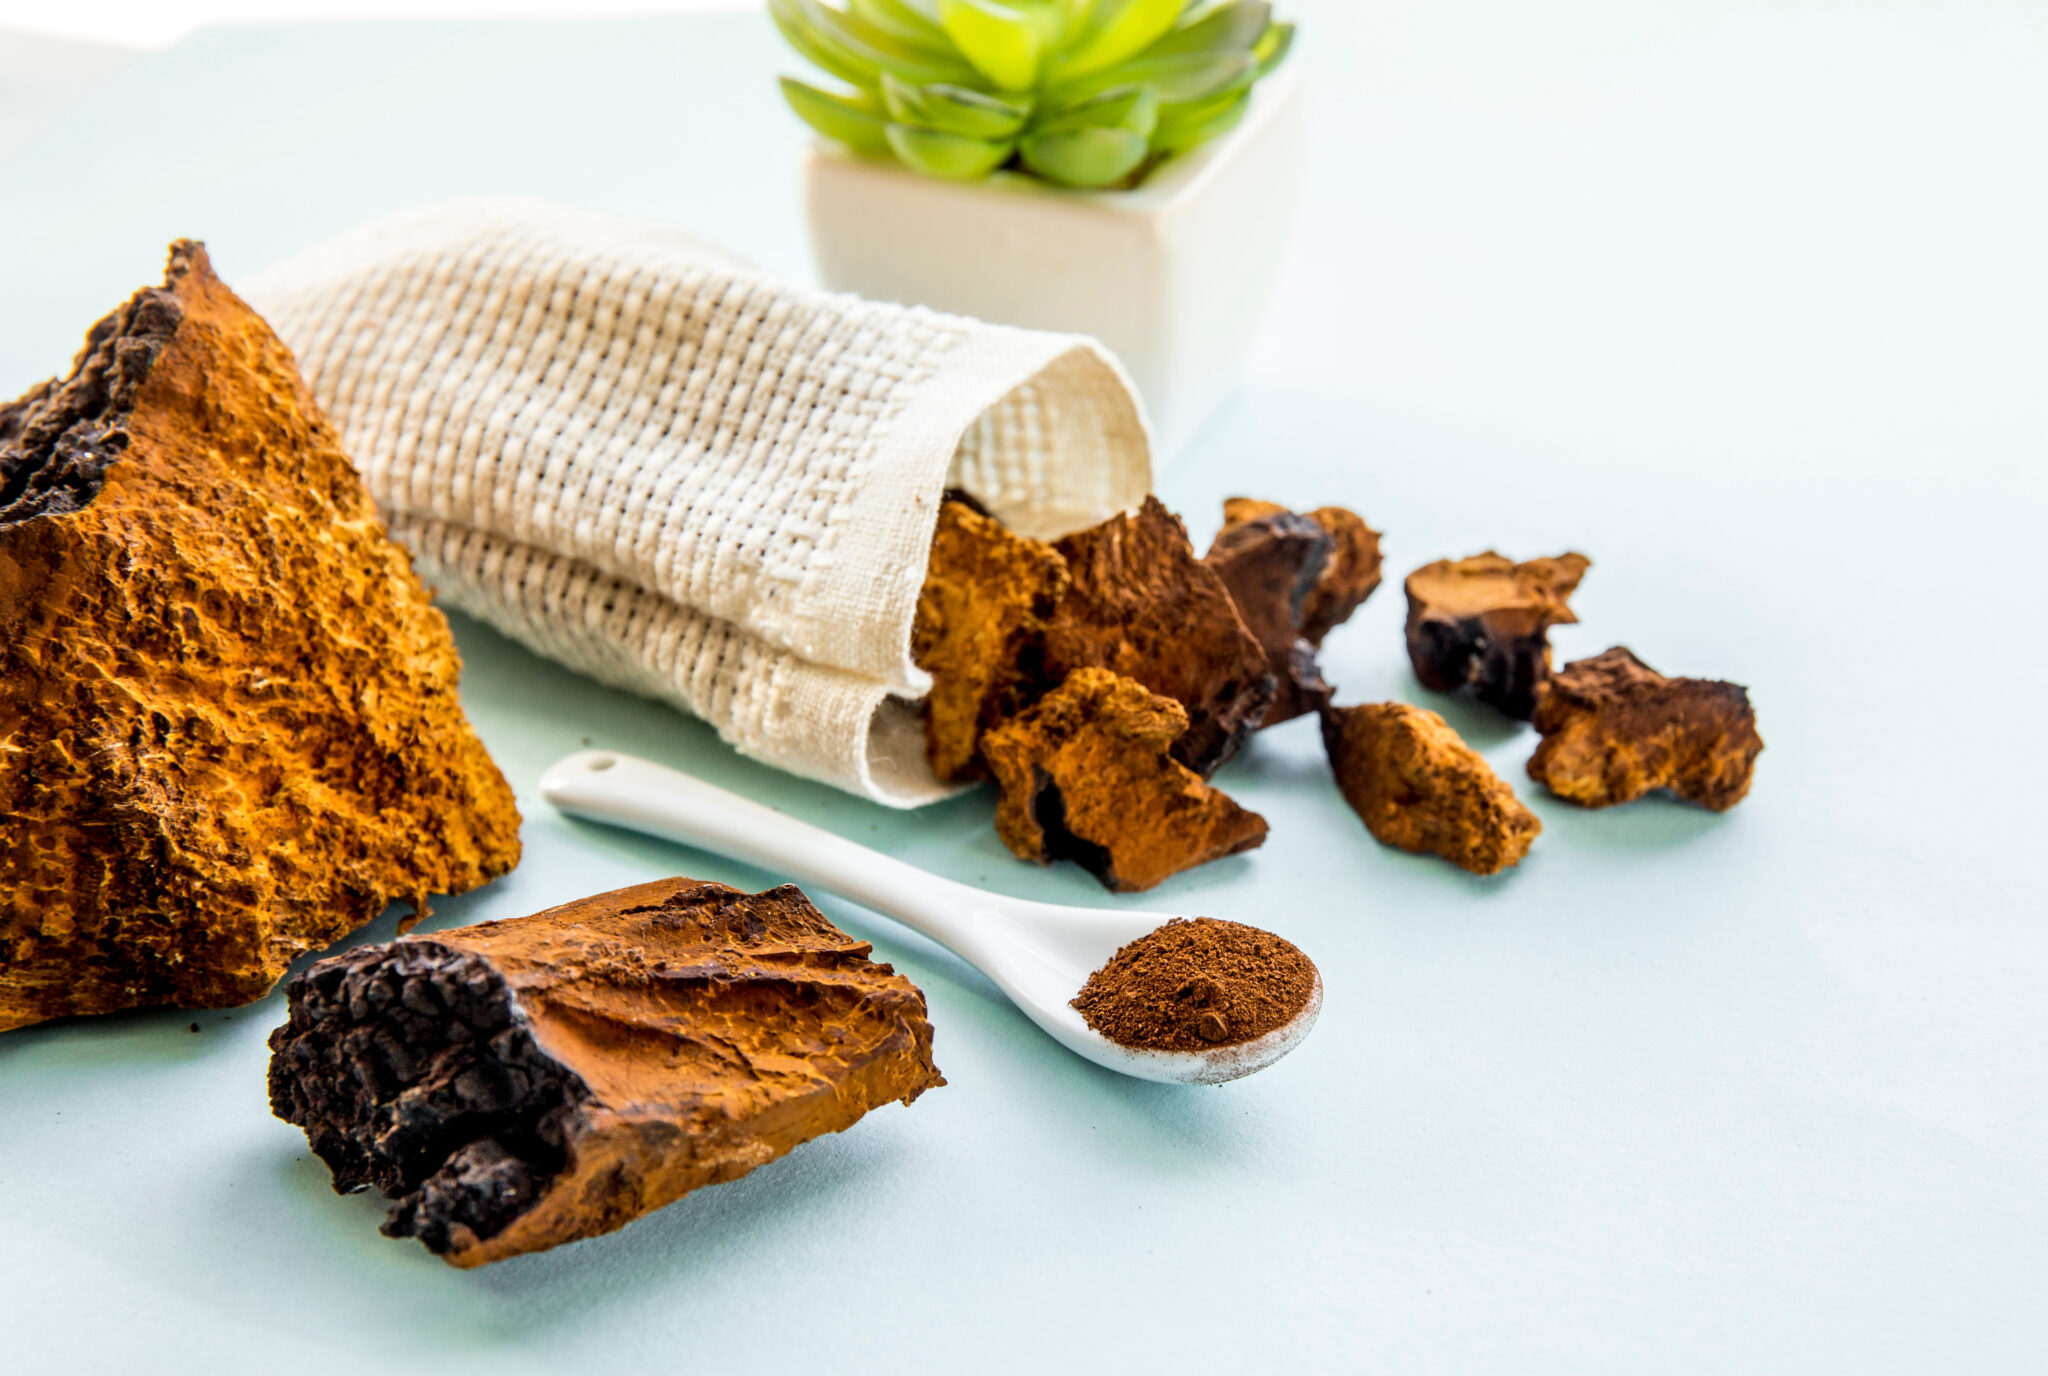 Chaga Functional Mushrooms A Comprehensive Guide to Their Benefits